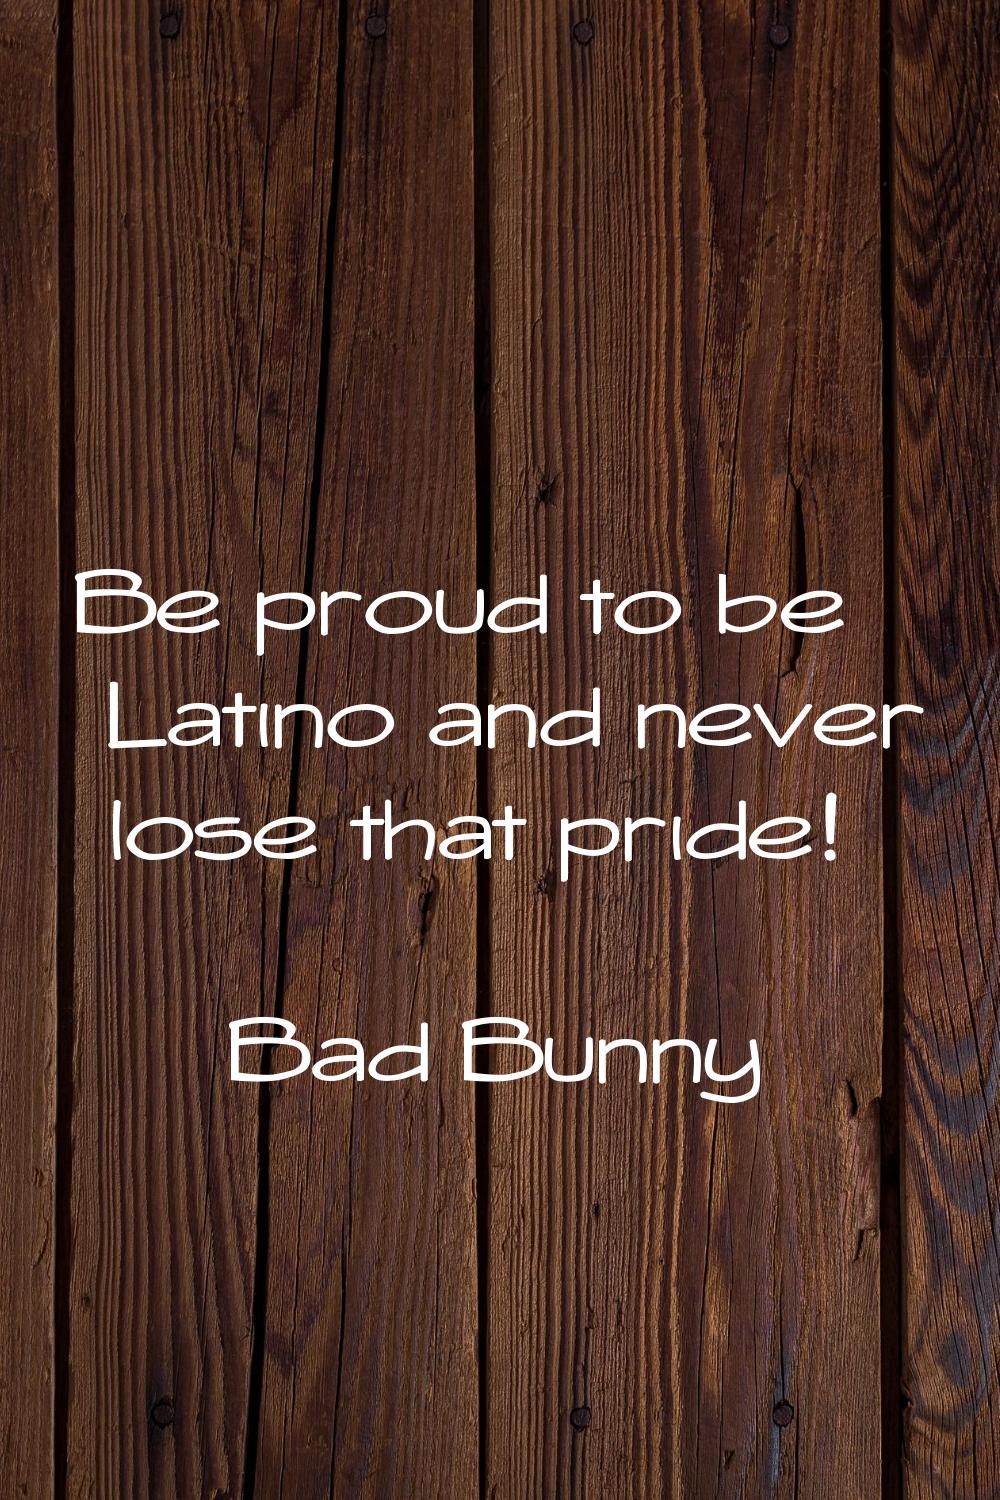 Be proud to be Latino and never lose that pride!